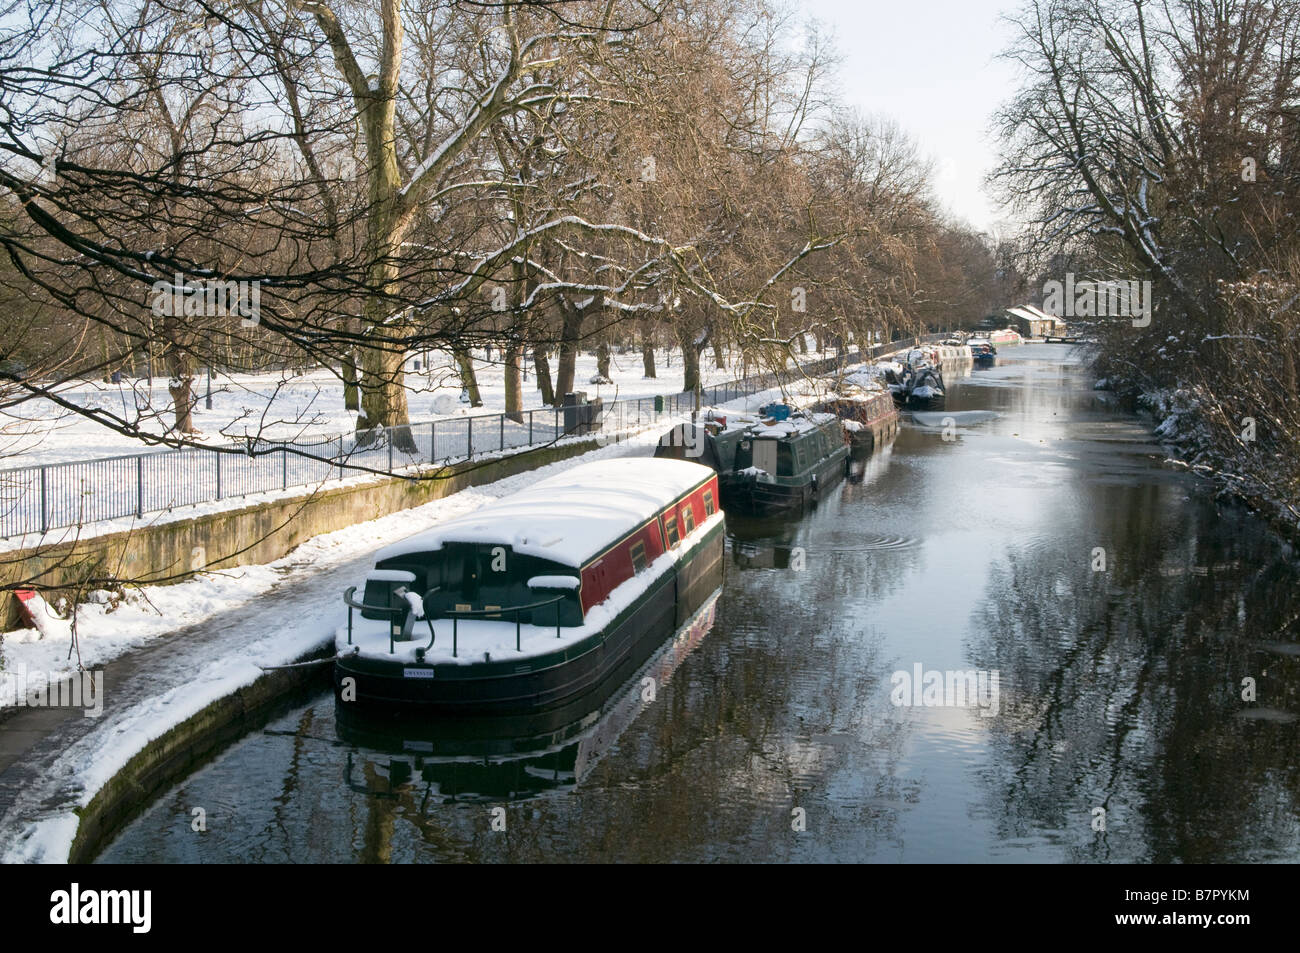 UK.Barges covered in snow by the Regent's Canal in Victoria Park, London Photo Julio Etchart Stock Photo